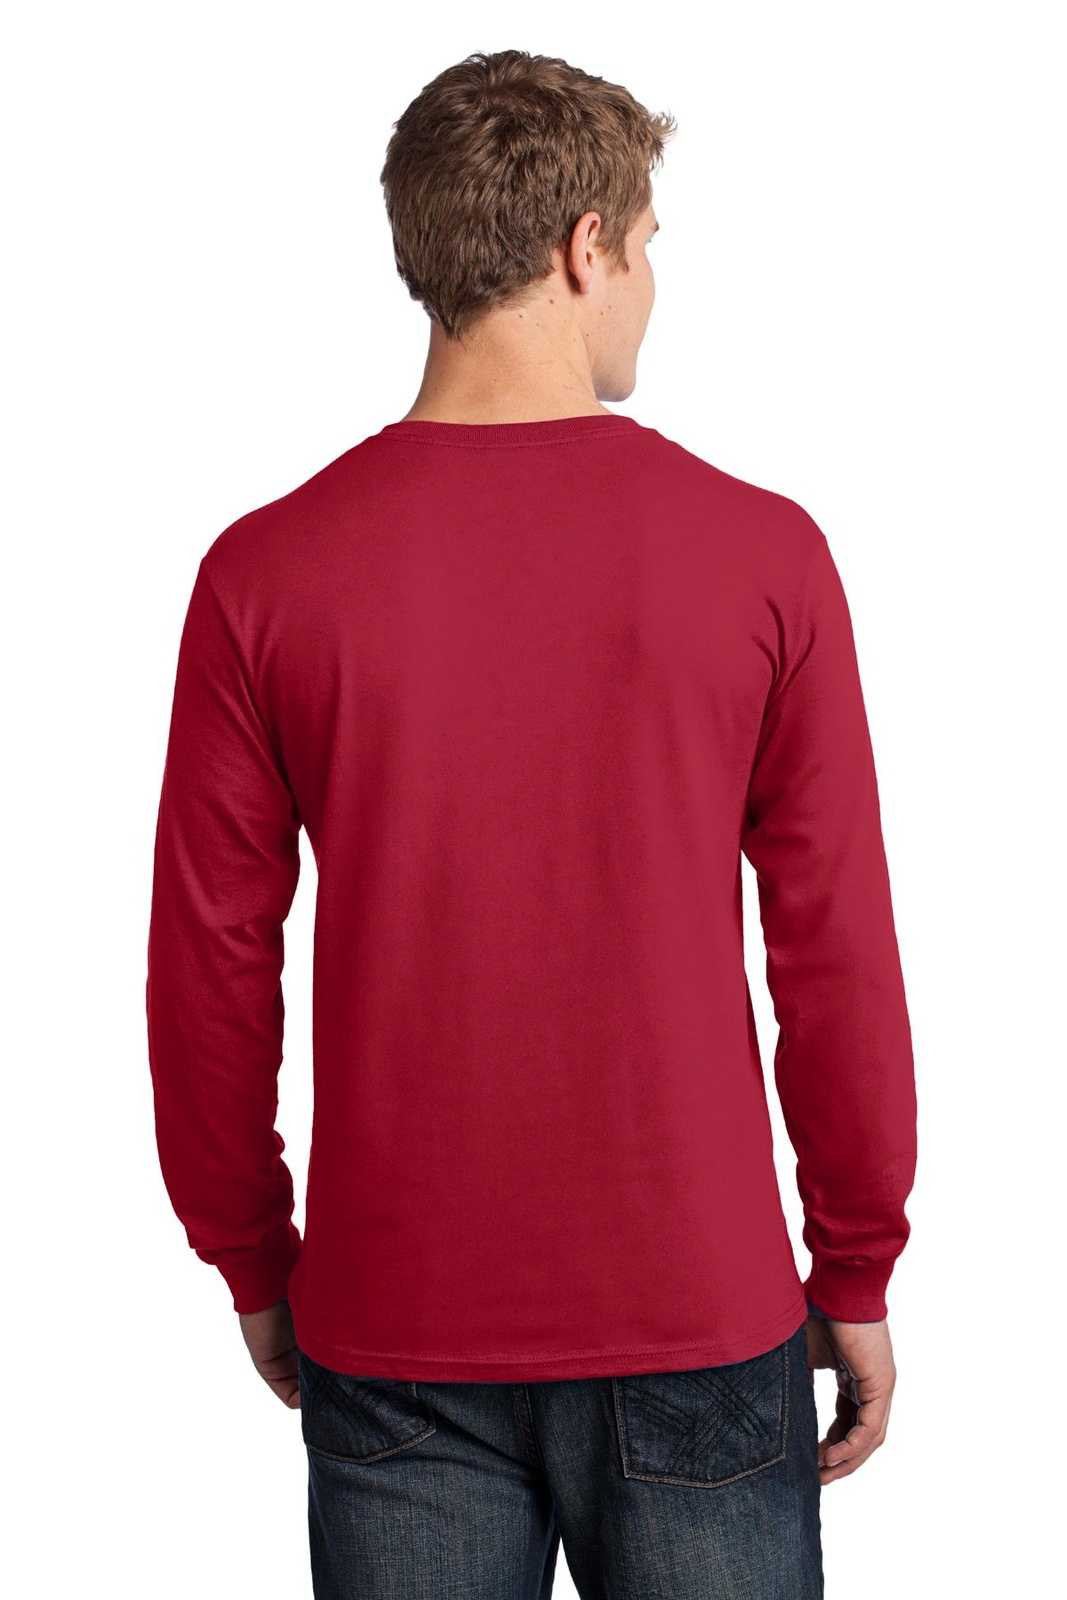 Port & Company PC54LS Long Sleeve Core Cotton Tee - Red - HIT a Double - 1